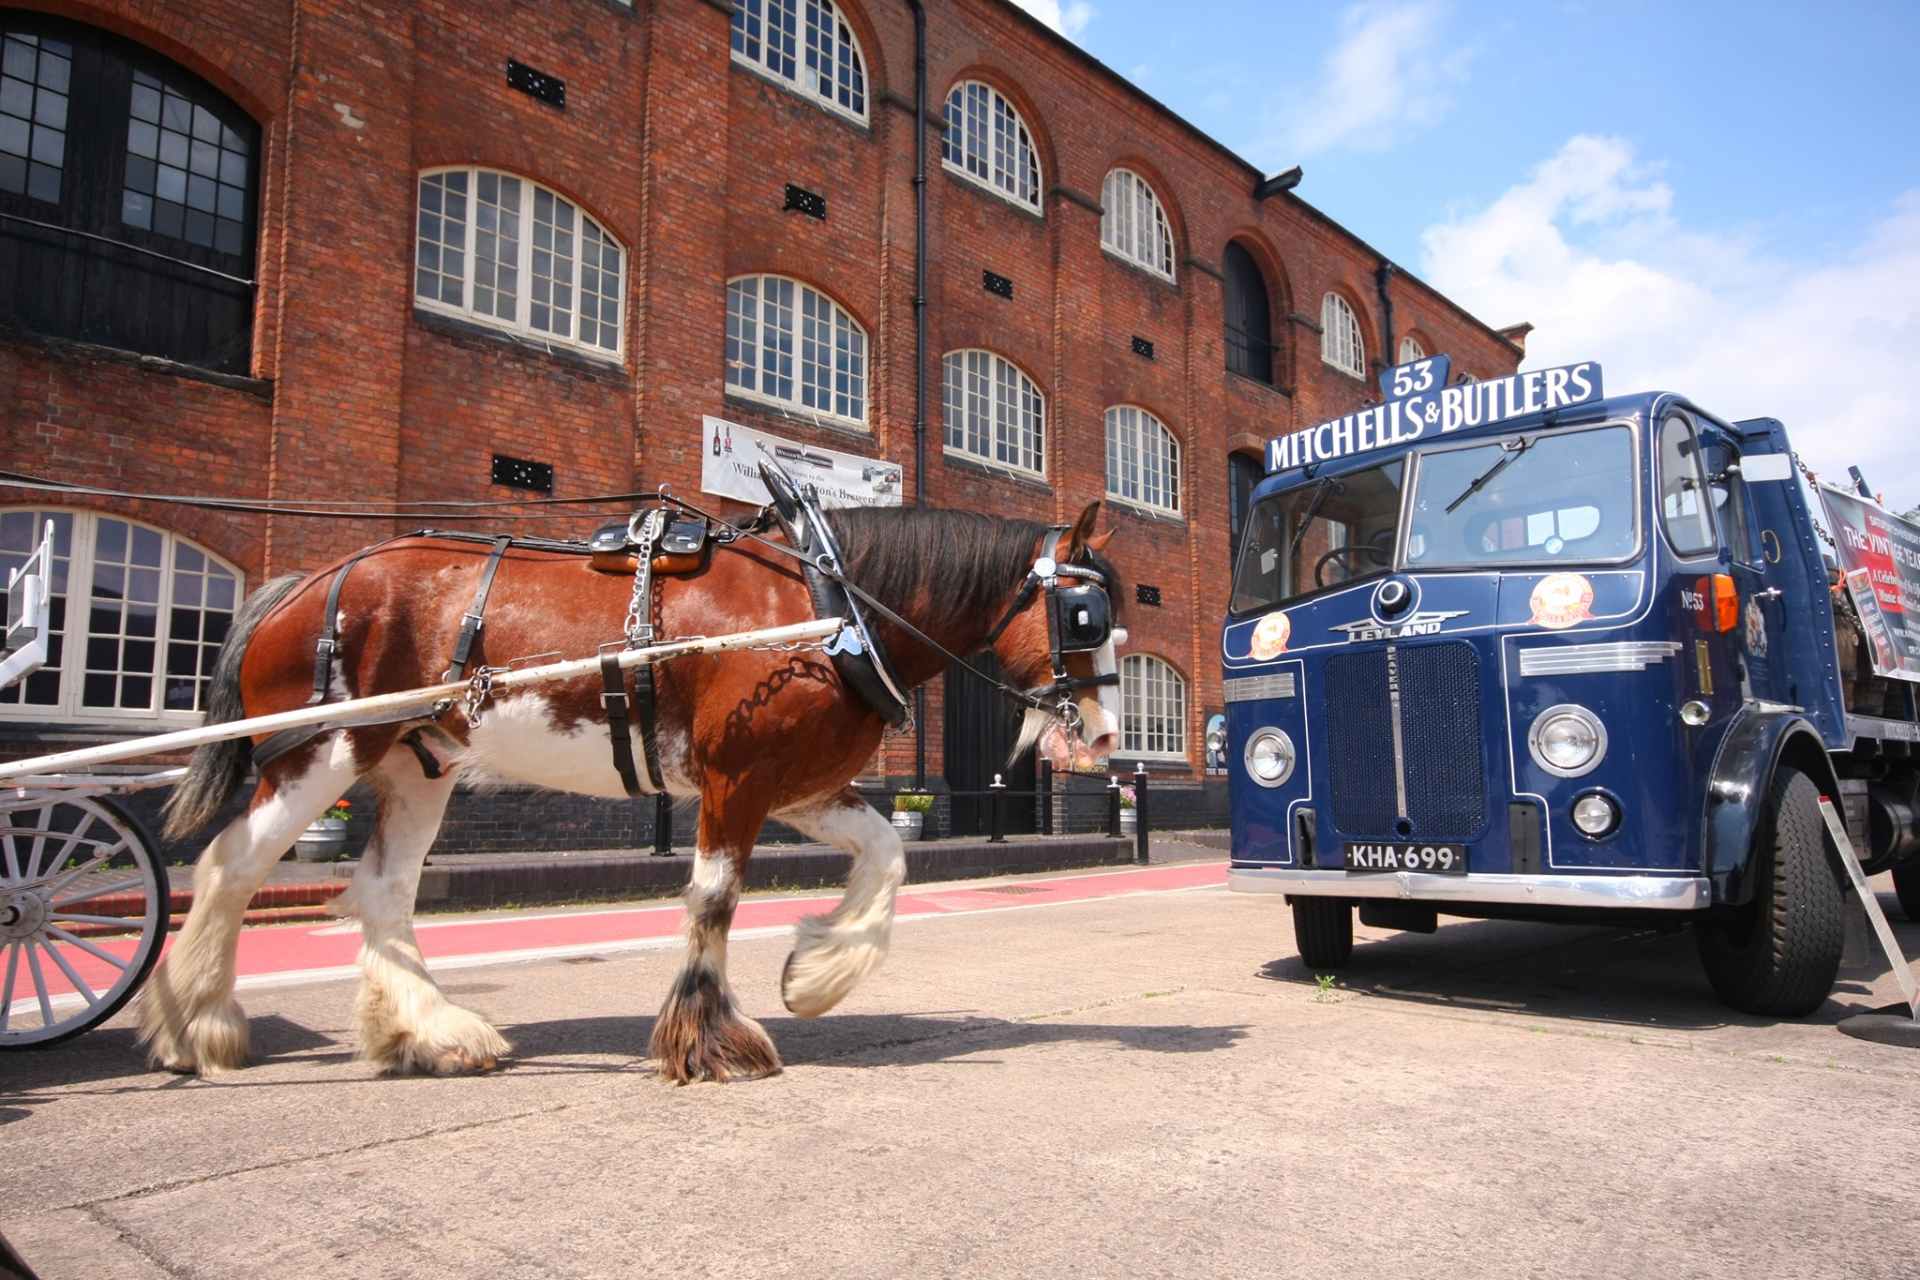 horse-pulling-cart-and-blue-truck-by-brick-building-at-national-brewery-centre-burton-upon-trent